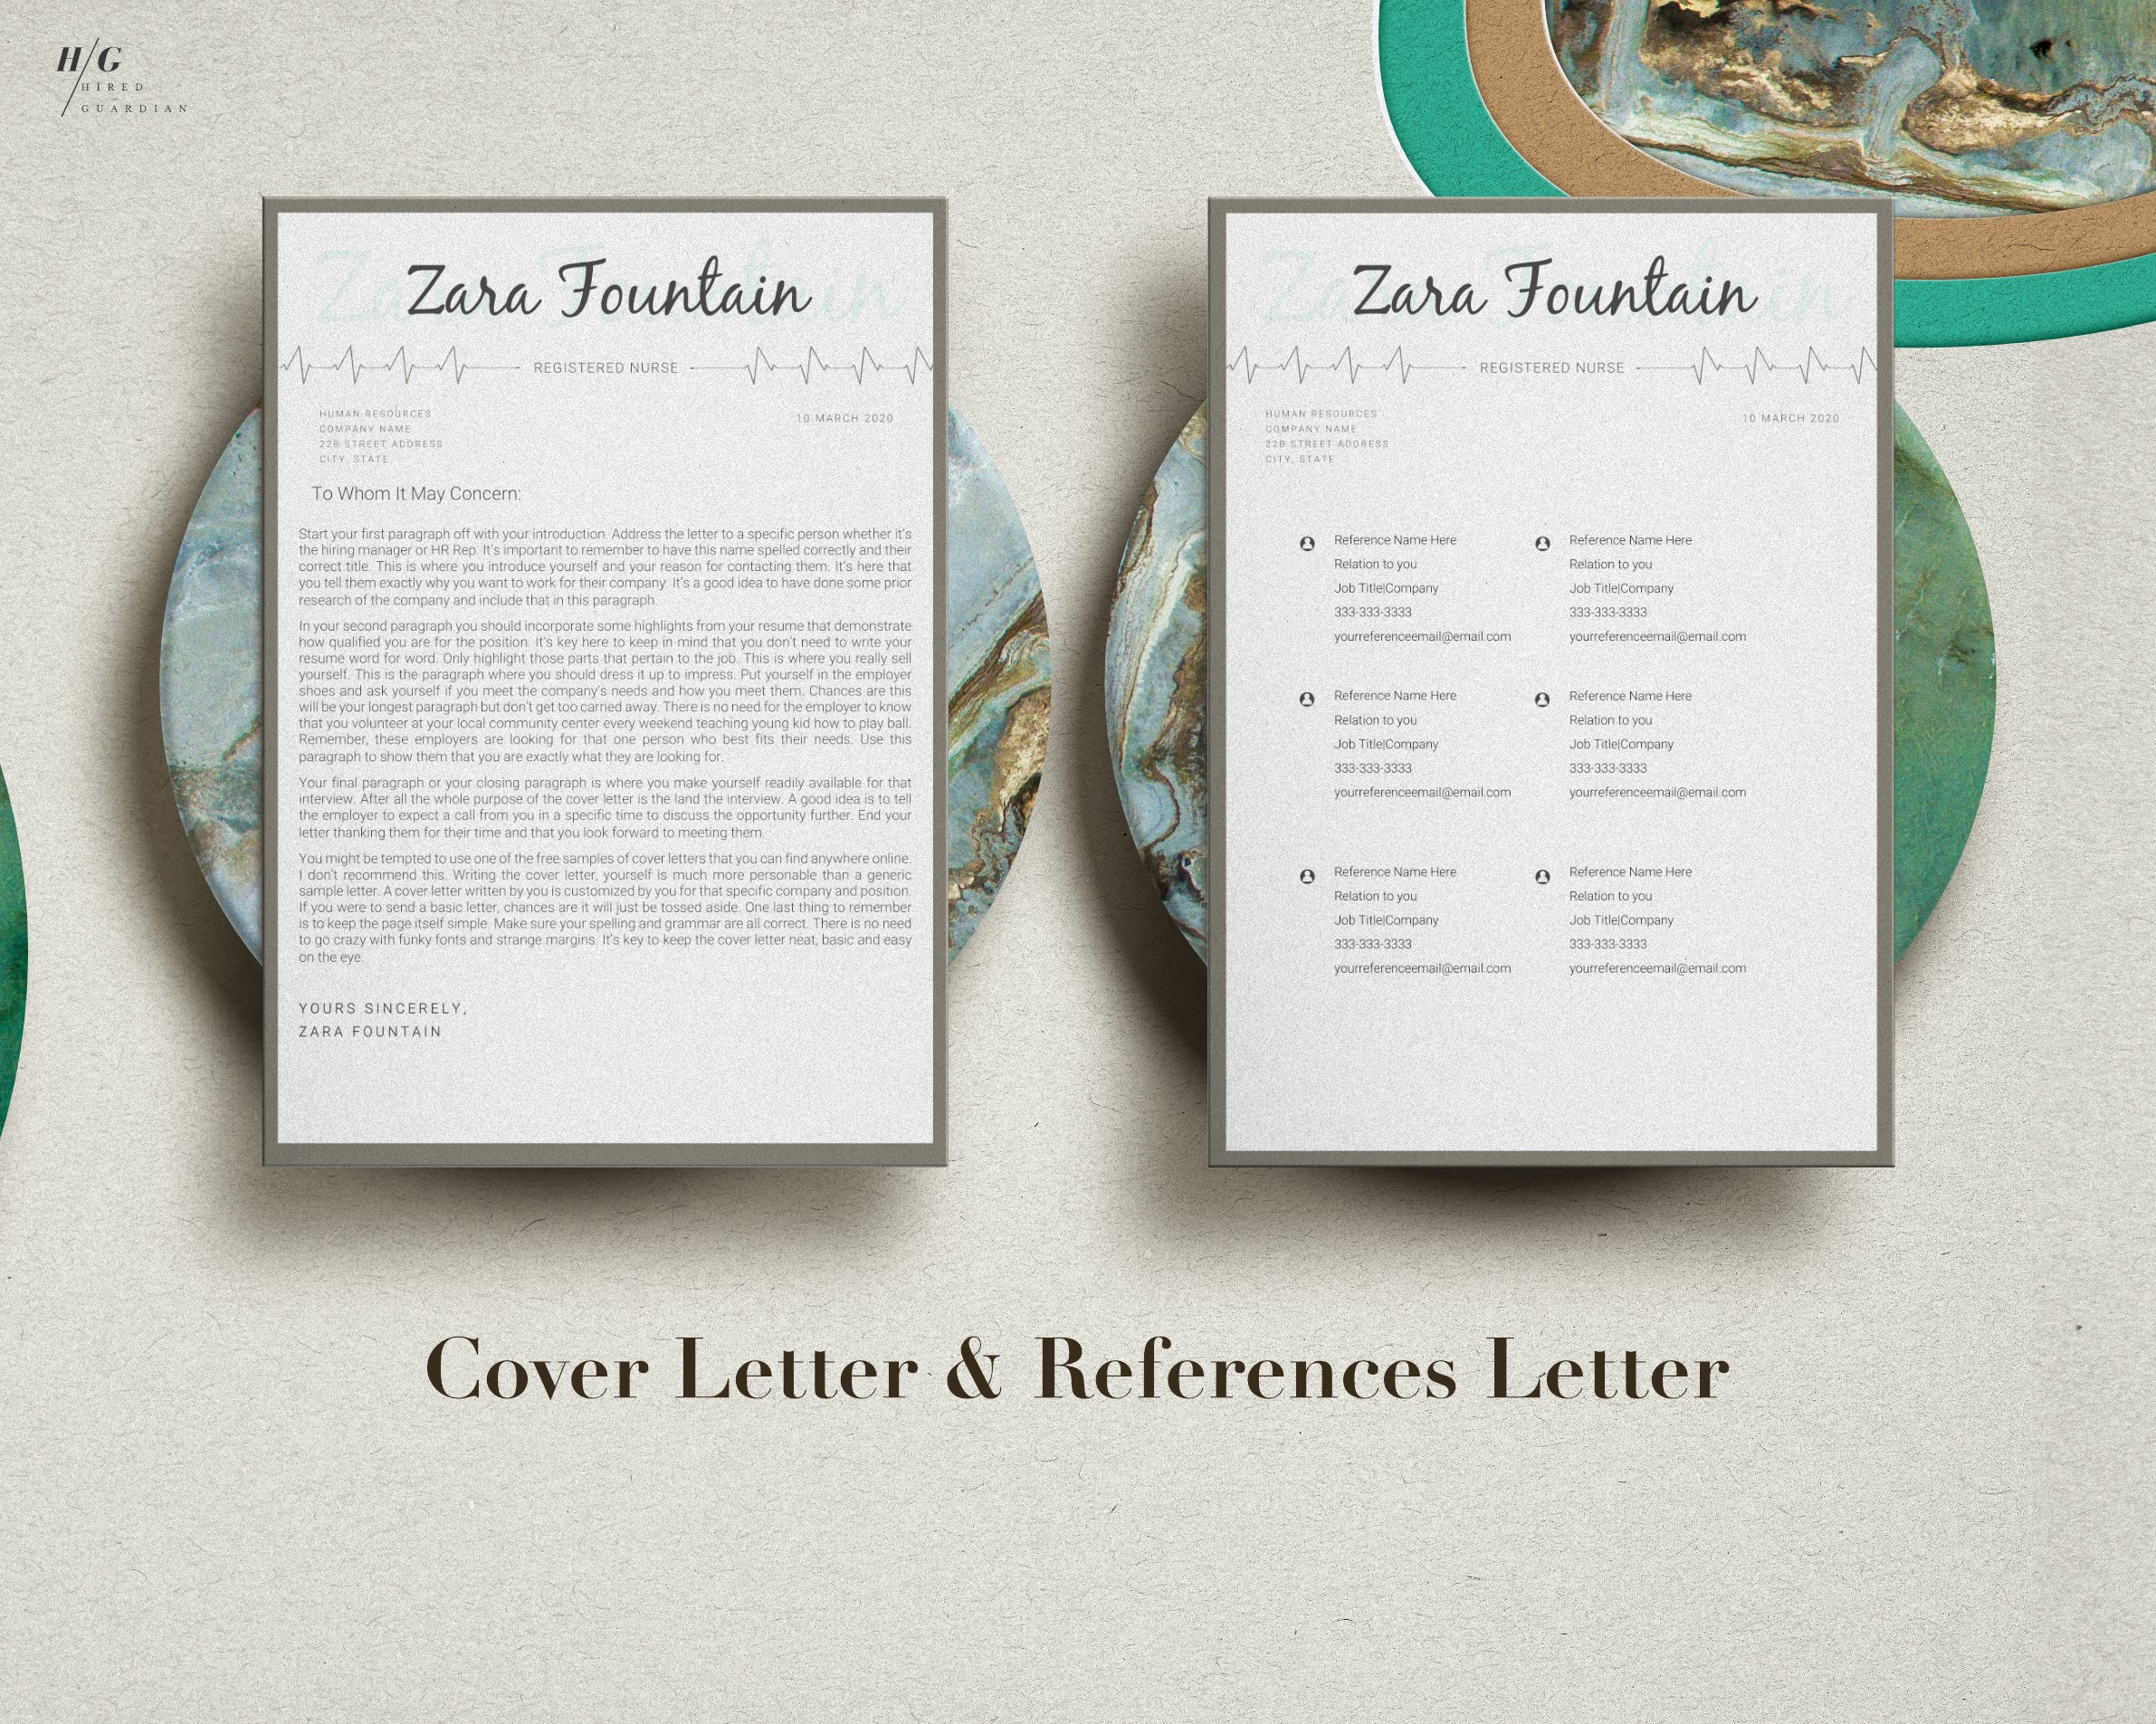 The cover letter and references letter are on a plate.